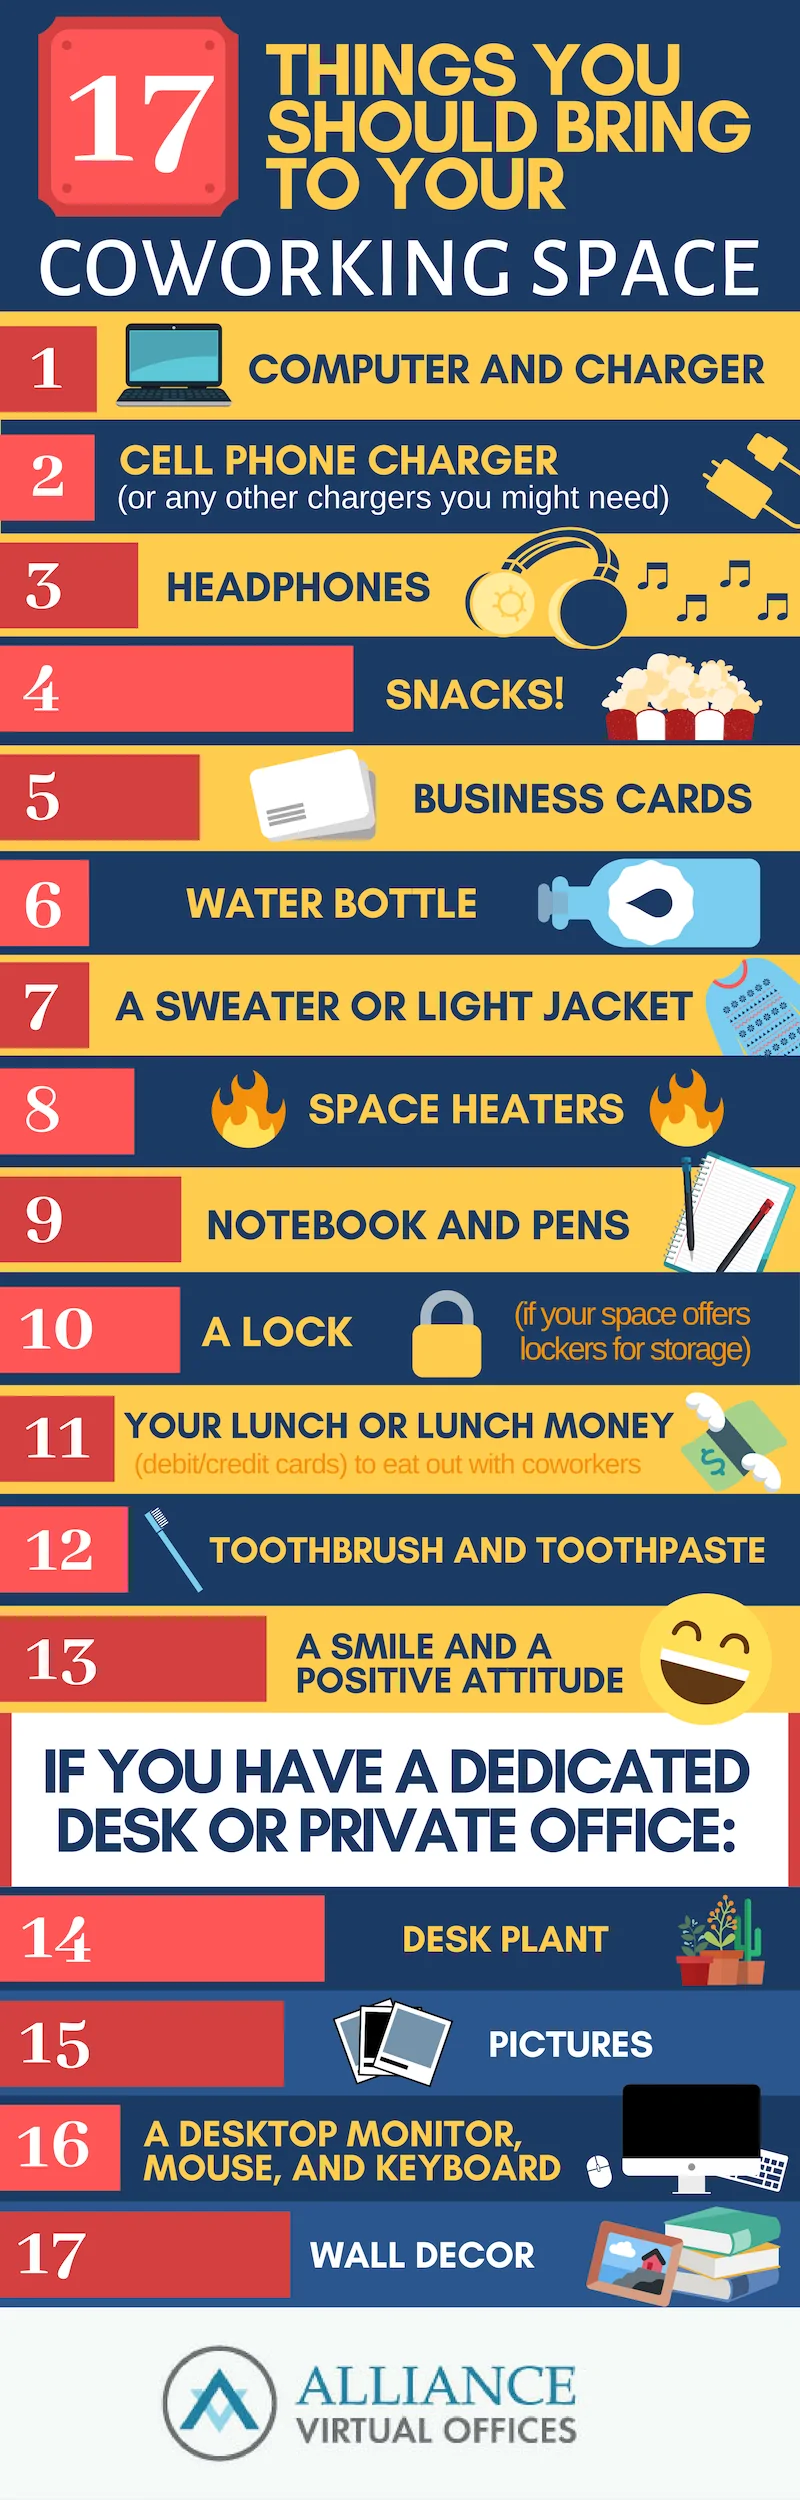 INFOGRAPHIC - 17 Things You Should Bring To Your Coworking Space